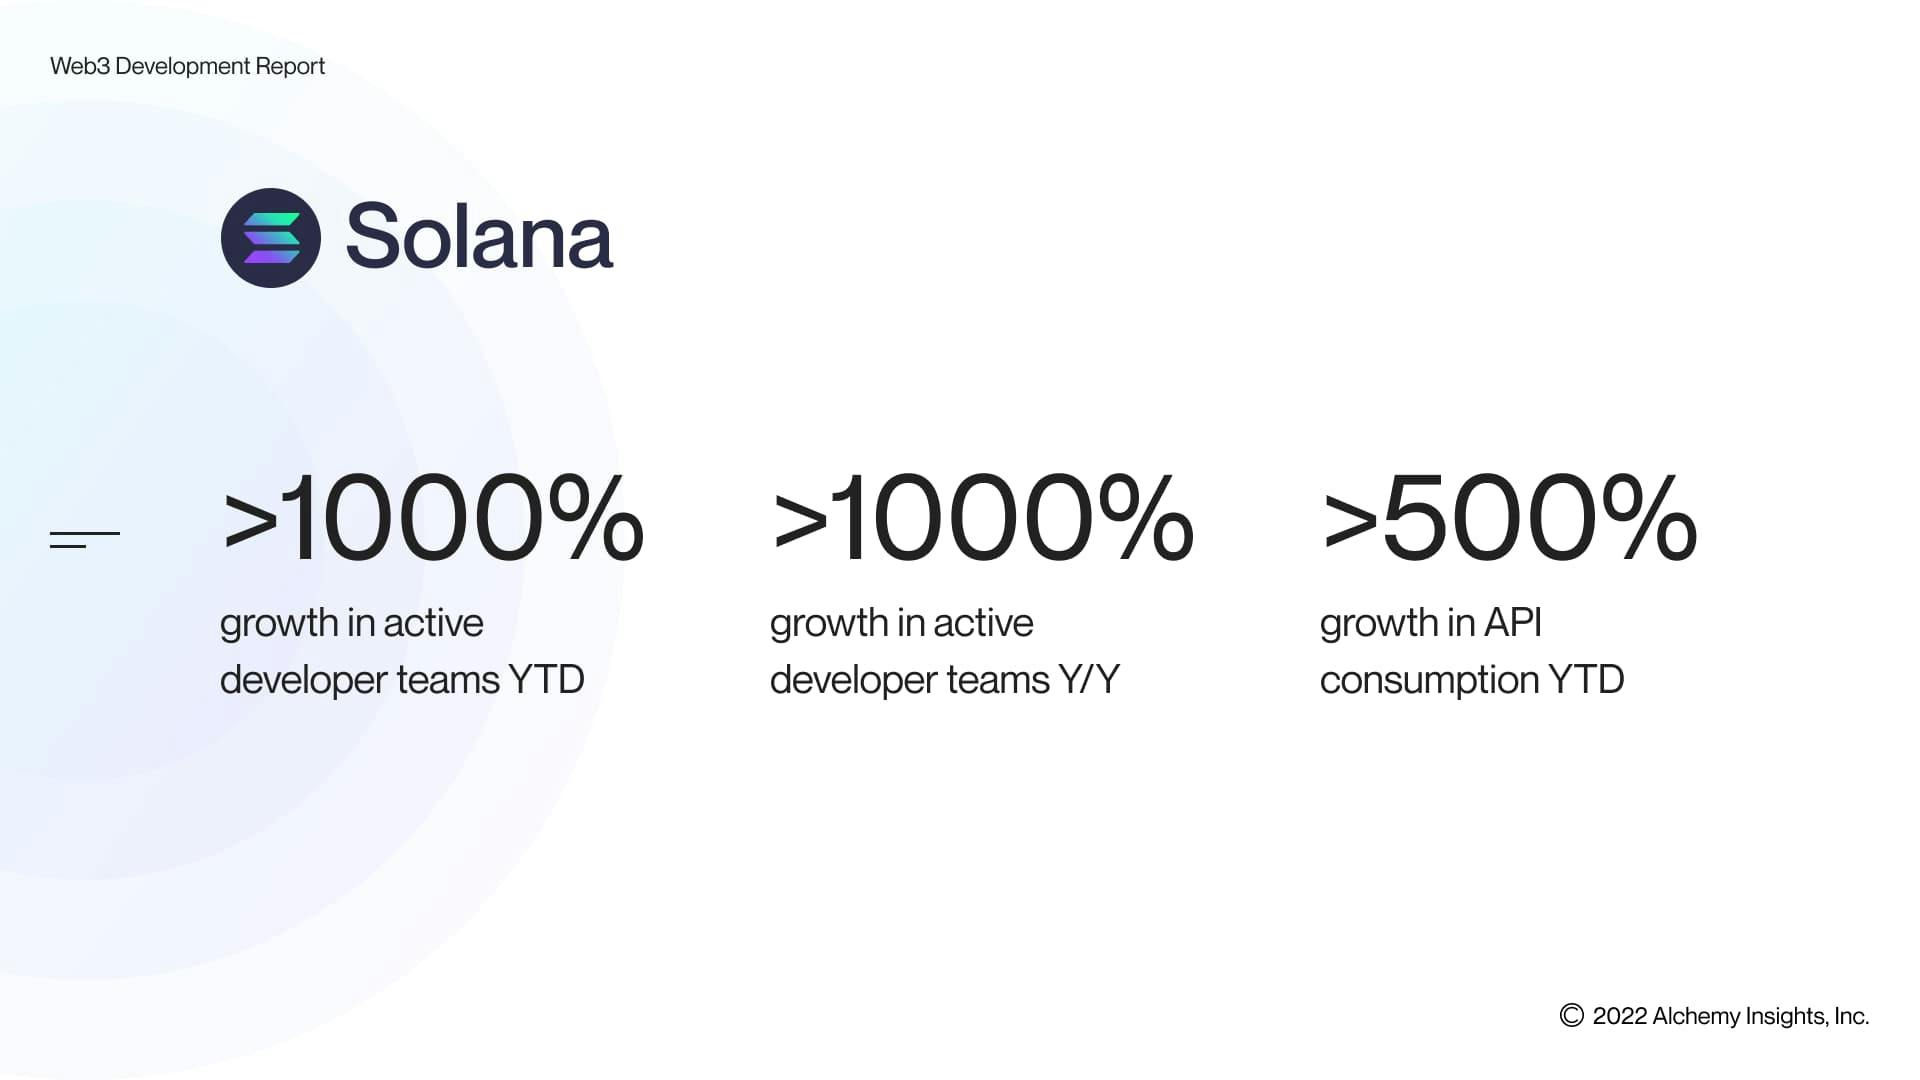 Solana developer growth as of Q3 2022.